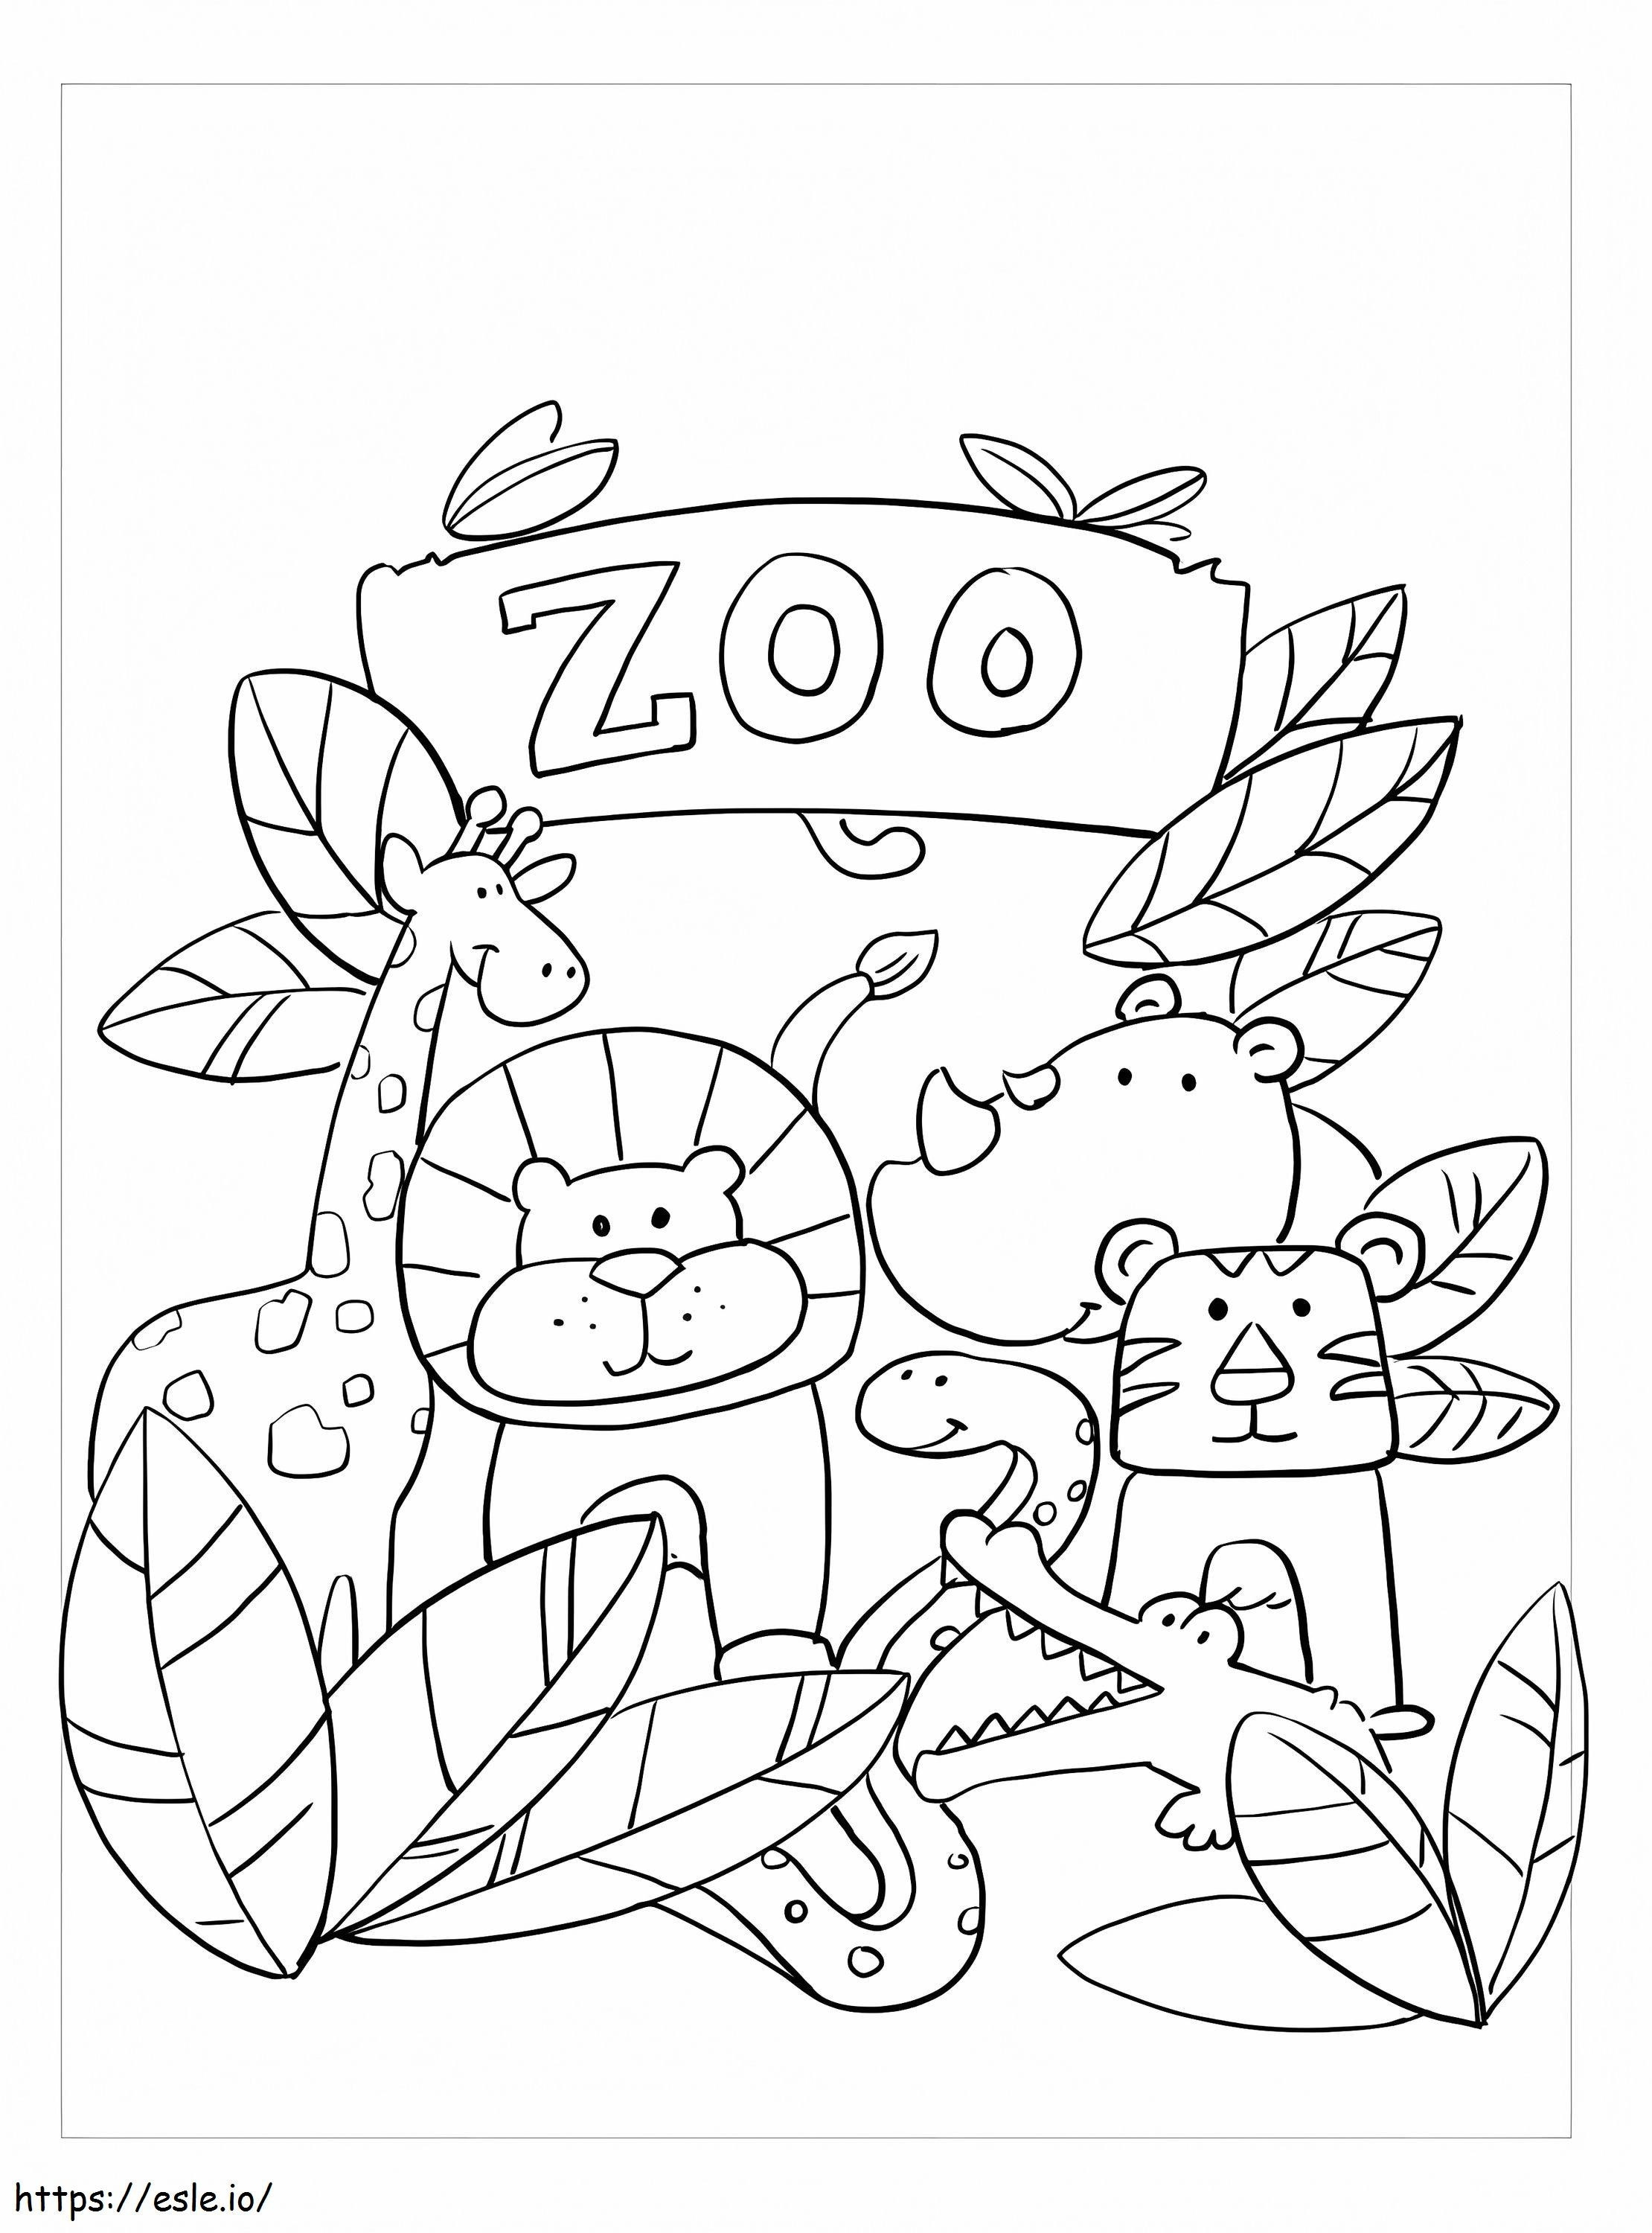 Zoological Incredible coloring page